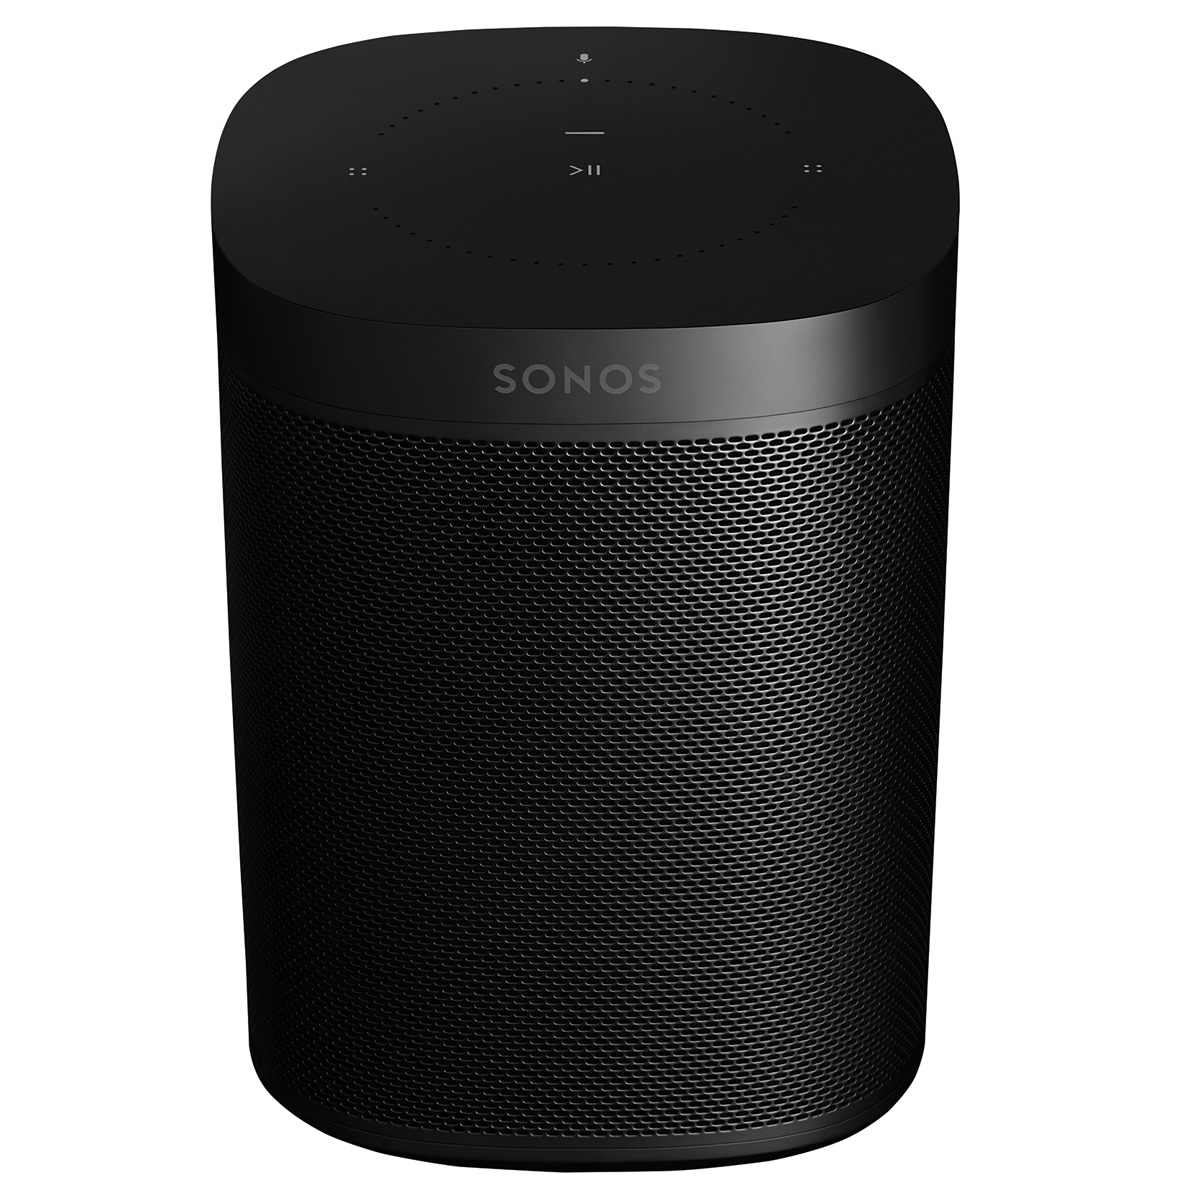 Sonos Two Room Set with Sonos One Gen 2 - Smart Speaker with Voice Control Built-In(Black) - image 4 of 4